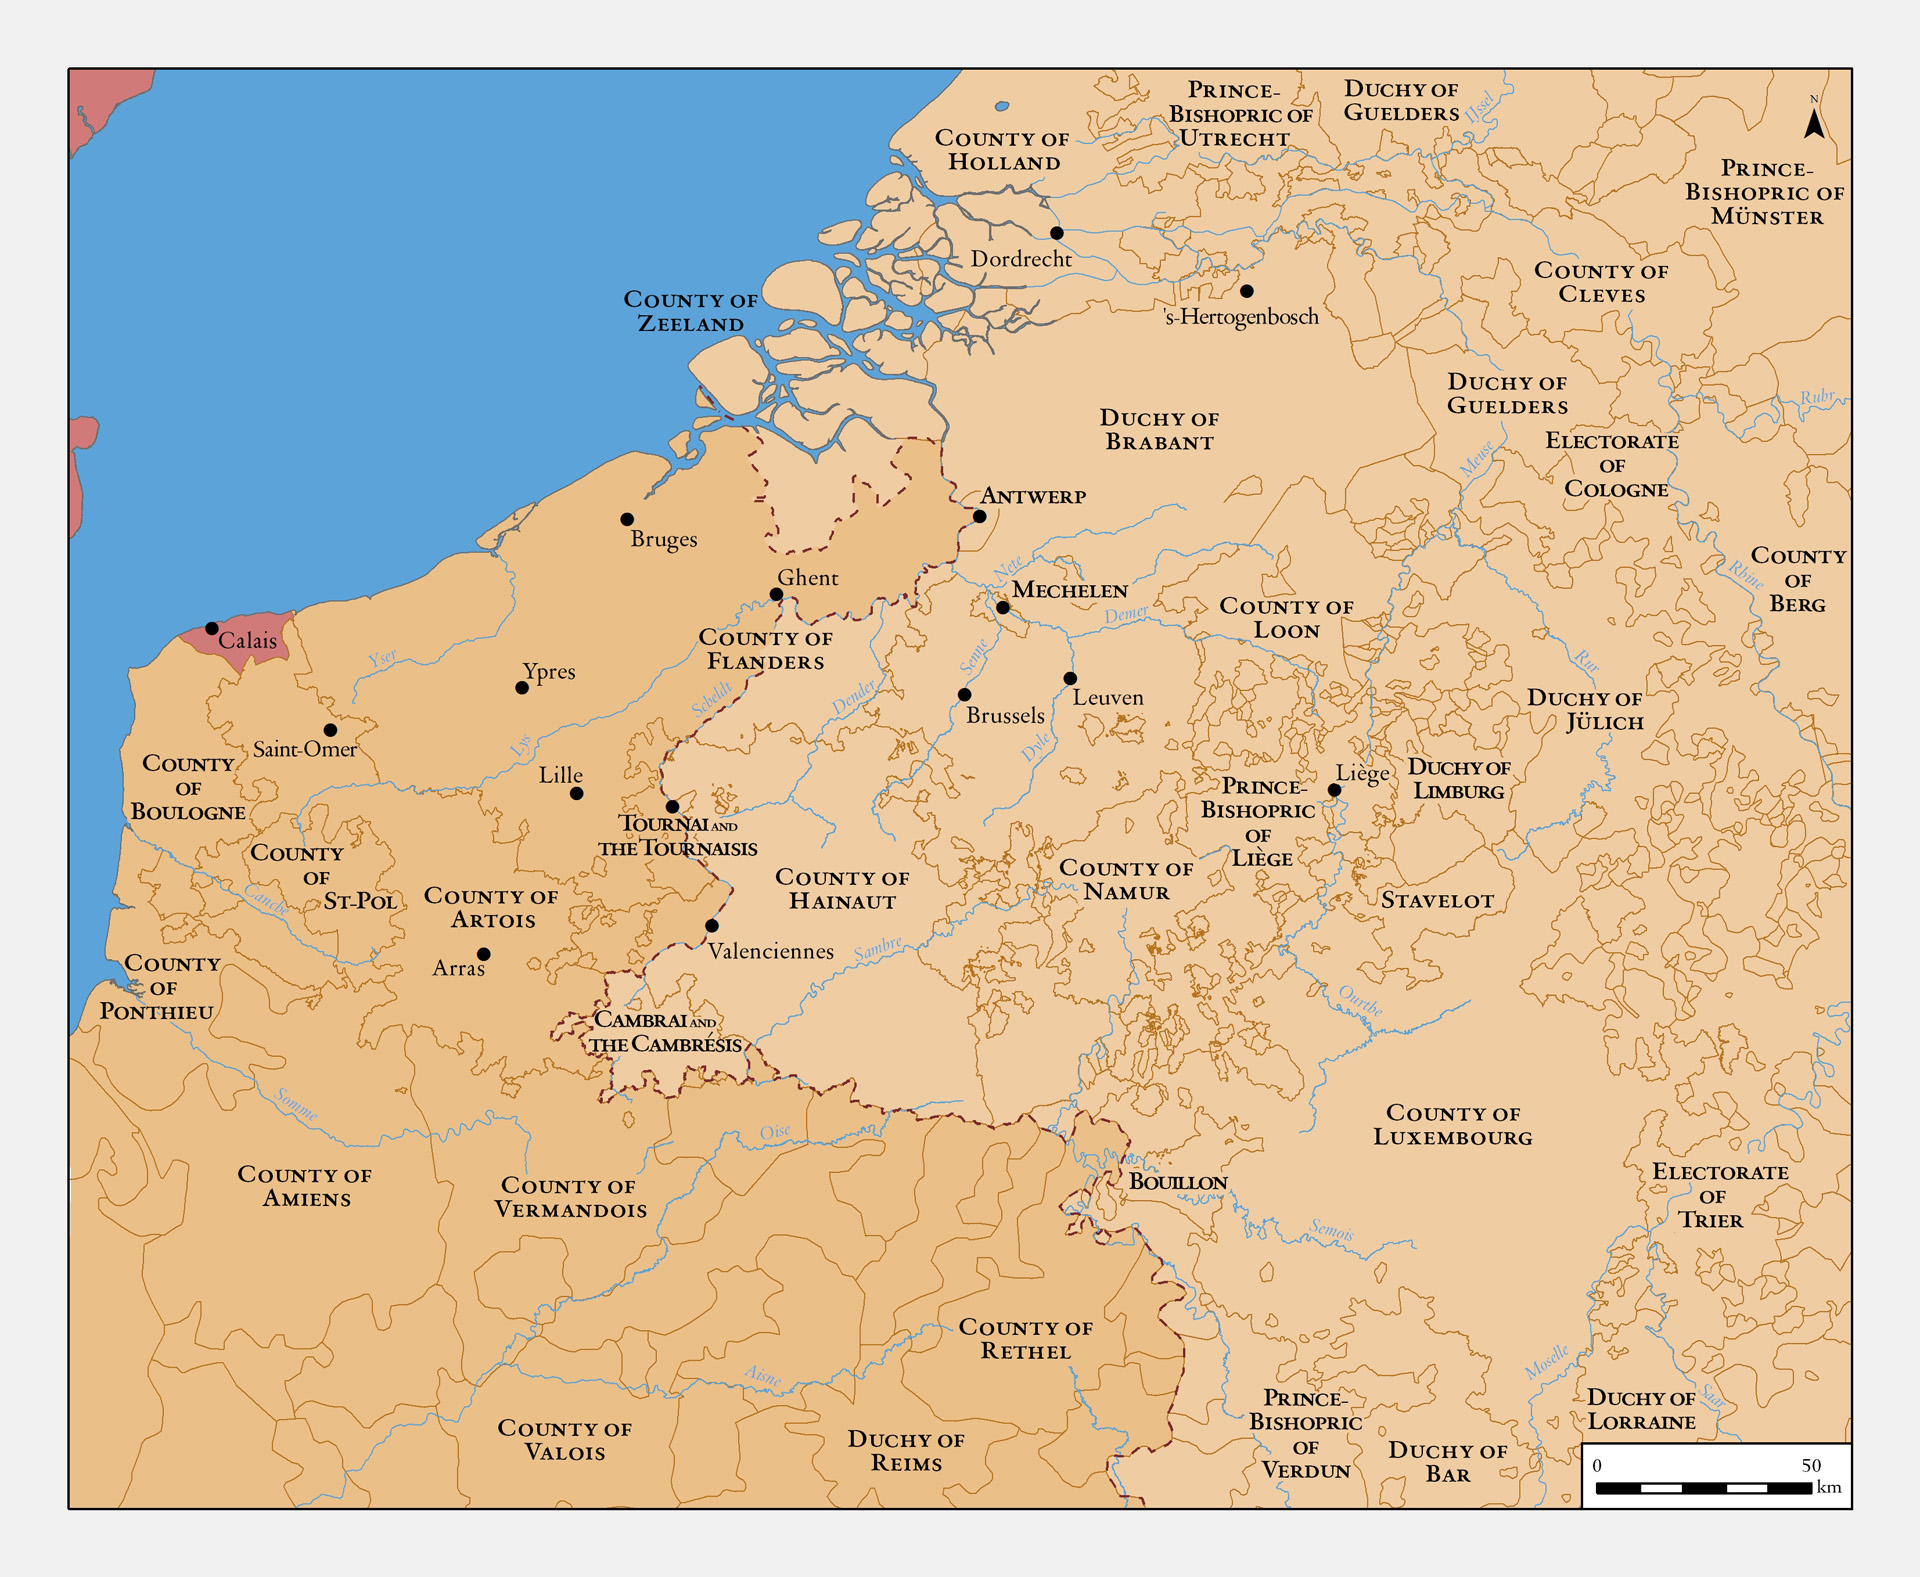 Medieval principalities in the Netherlands, 14th century 